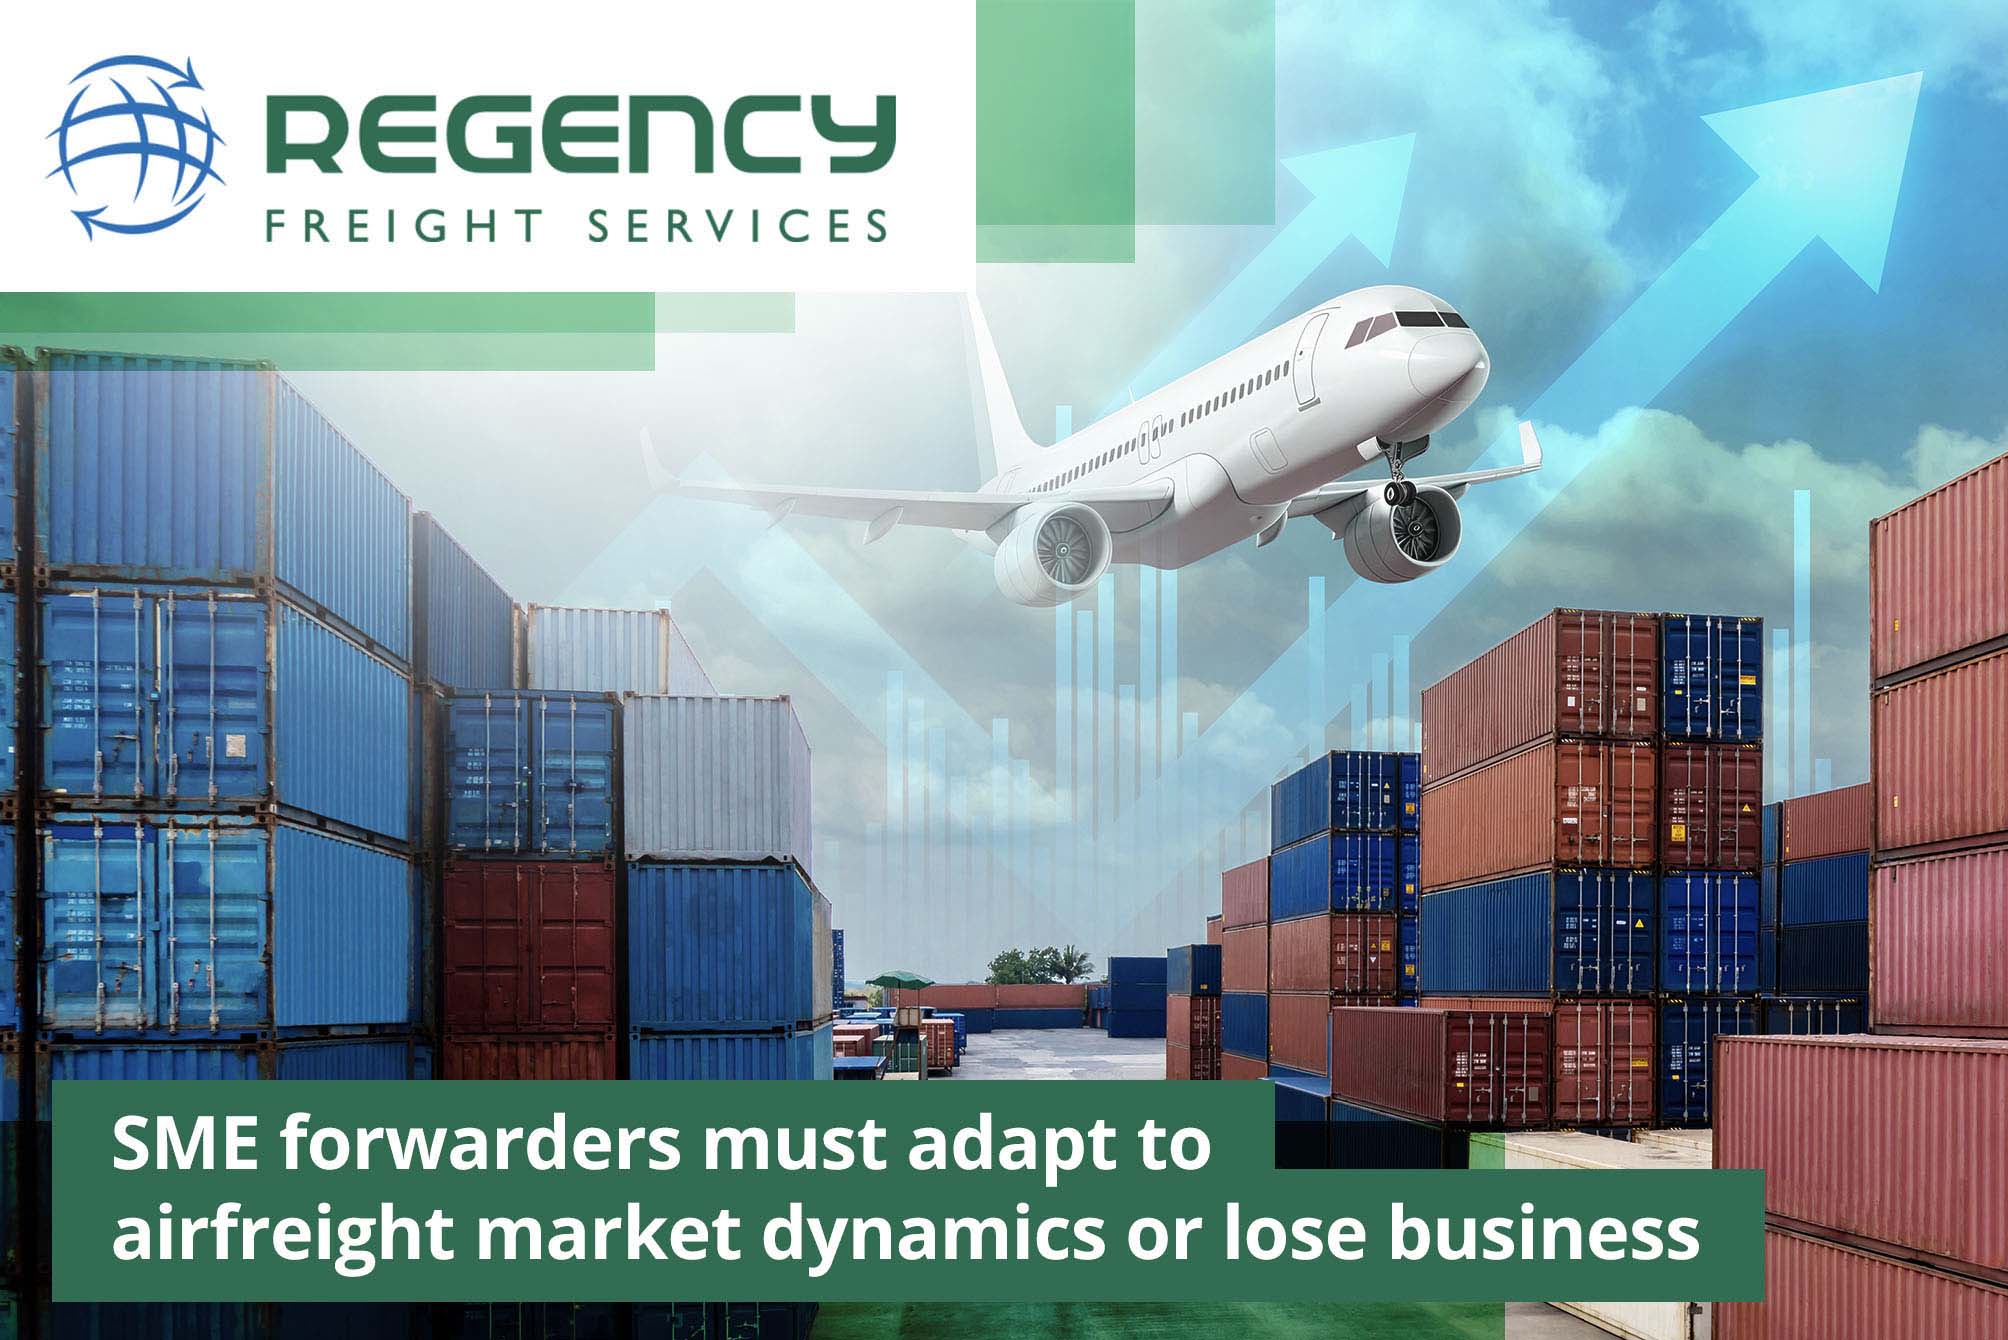 SME forwarders must adapt to airfreight market dynamics or lose business